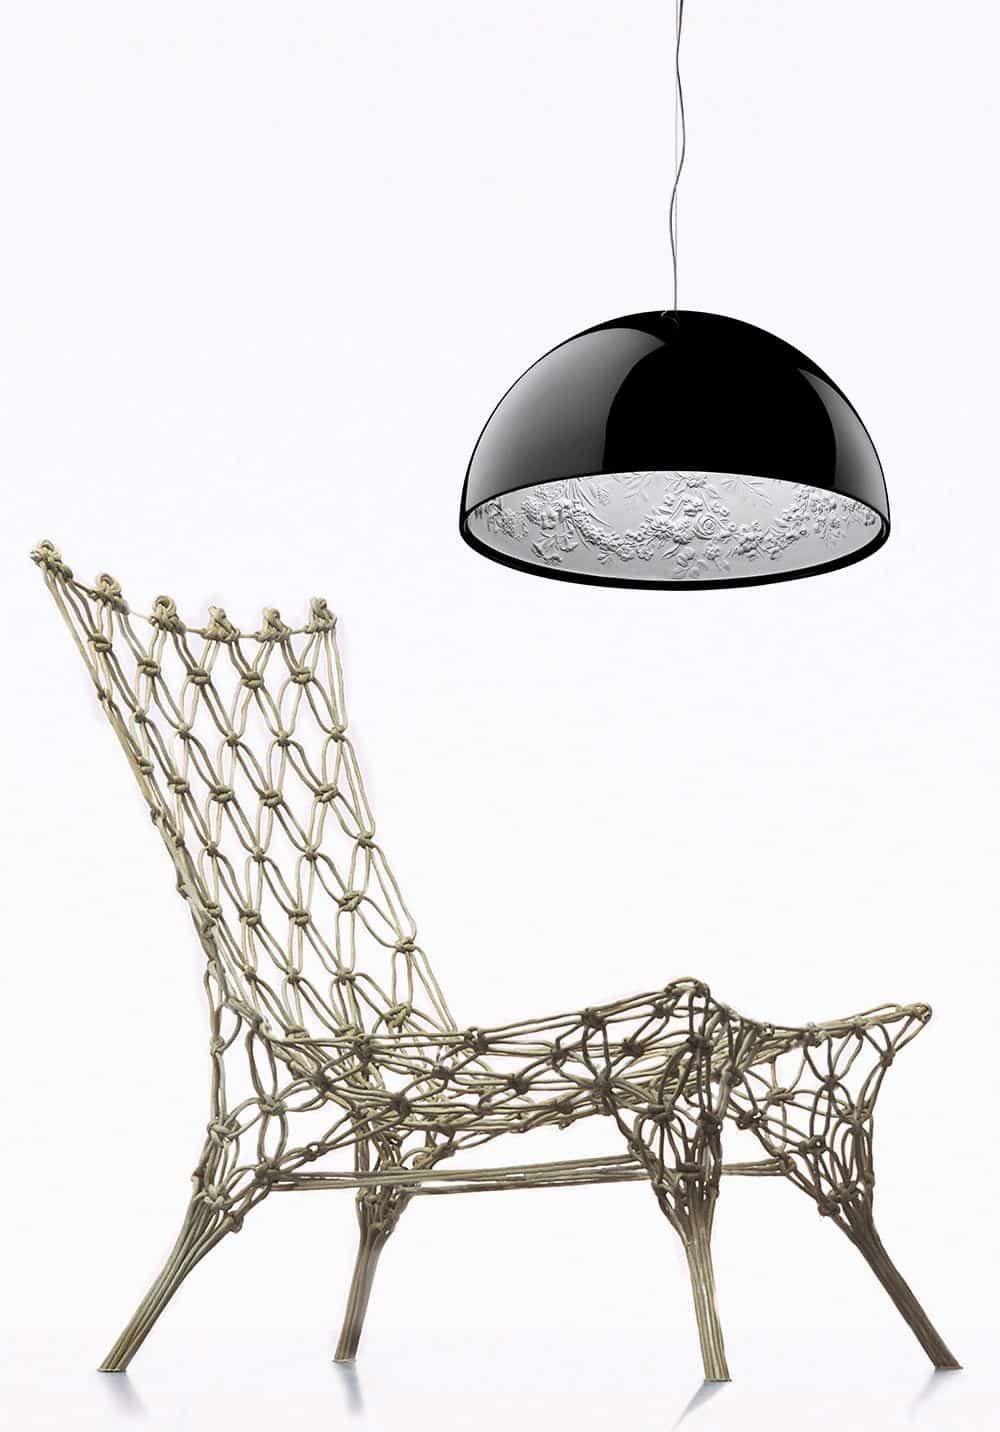 Marcel Wanders Thinks Design Should Be Playful, Romantic and Surreal -  1stDibs Introspective